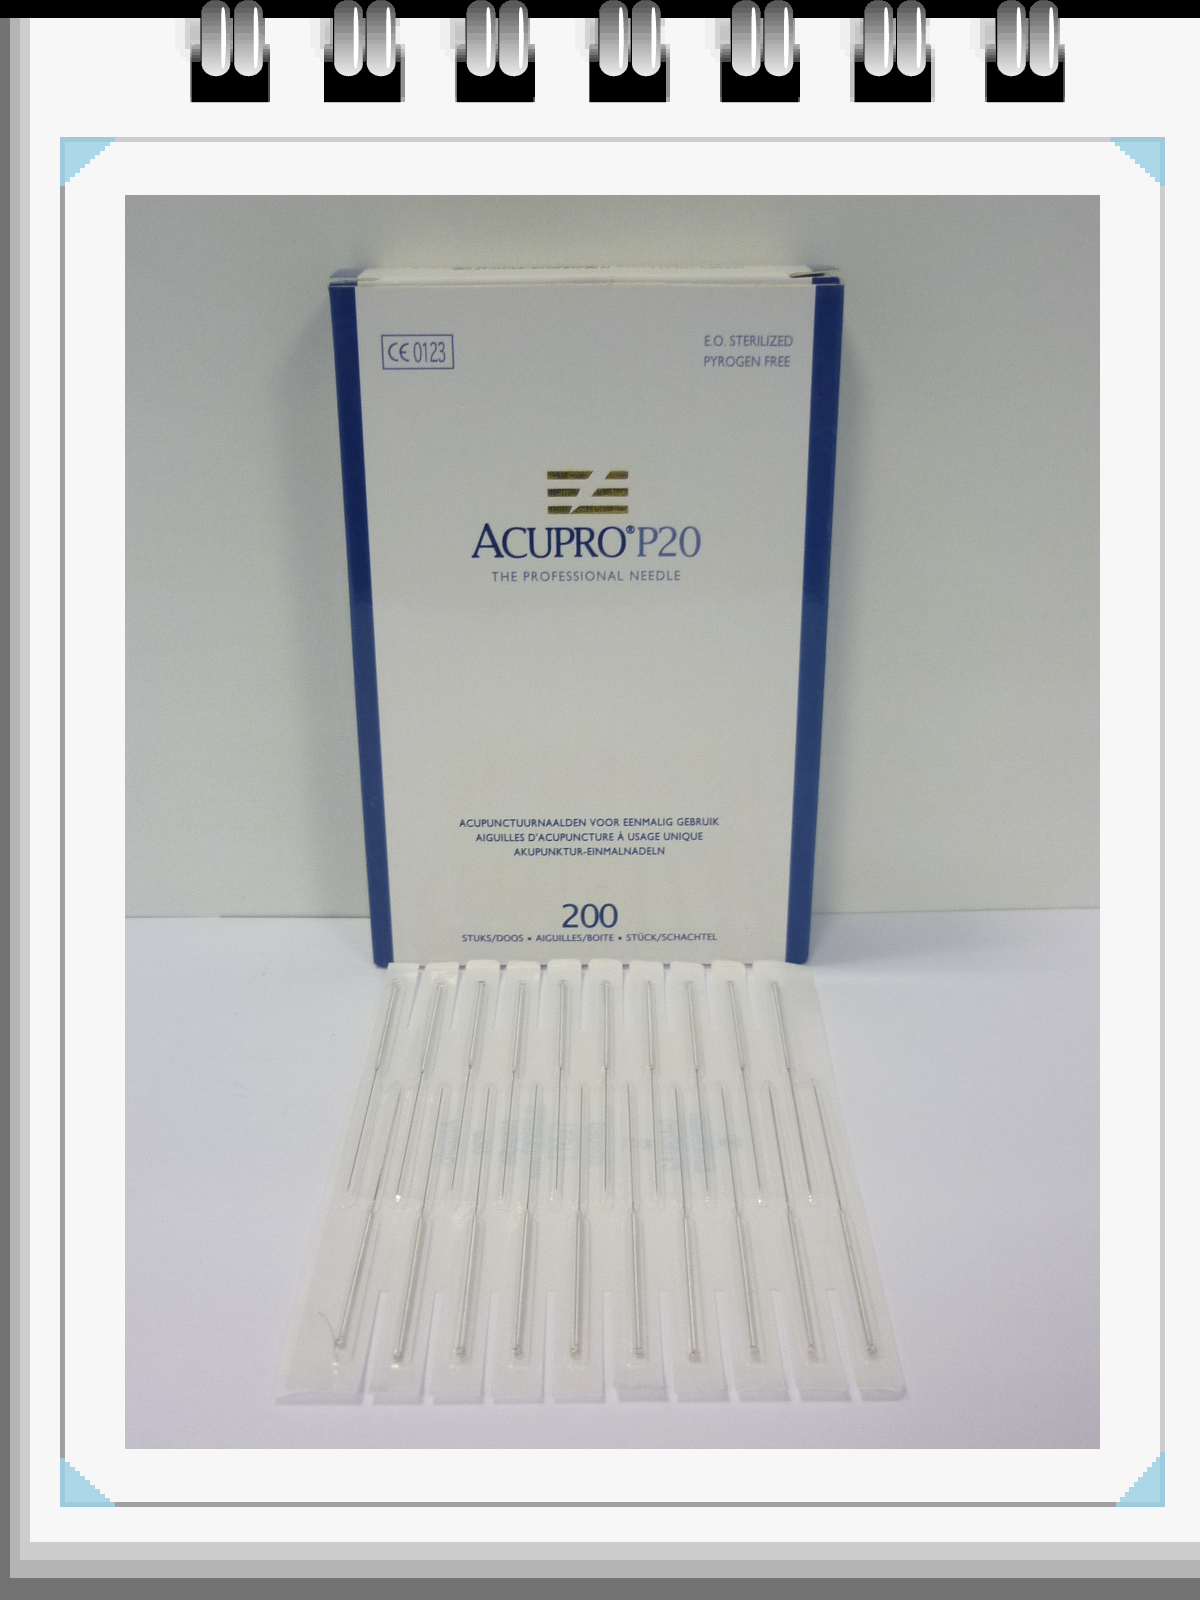 All Products - Acupunctuurnaalden: 0,22 x 40mm, p--200